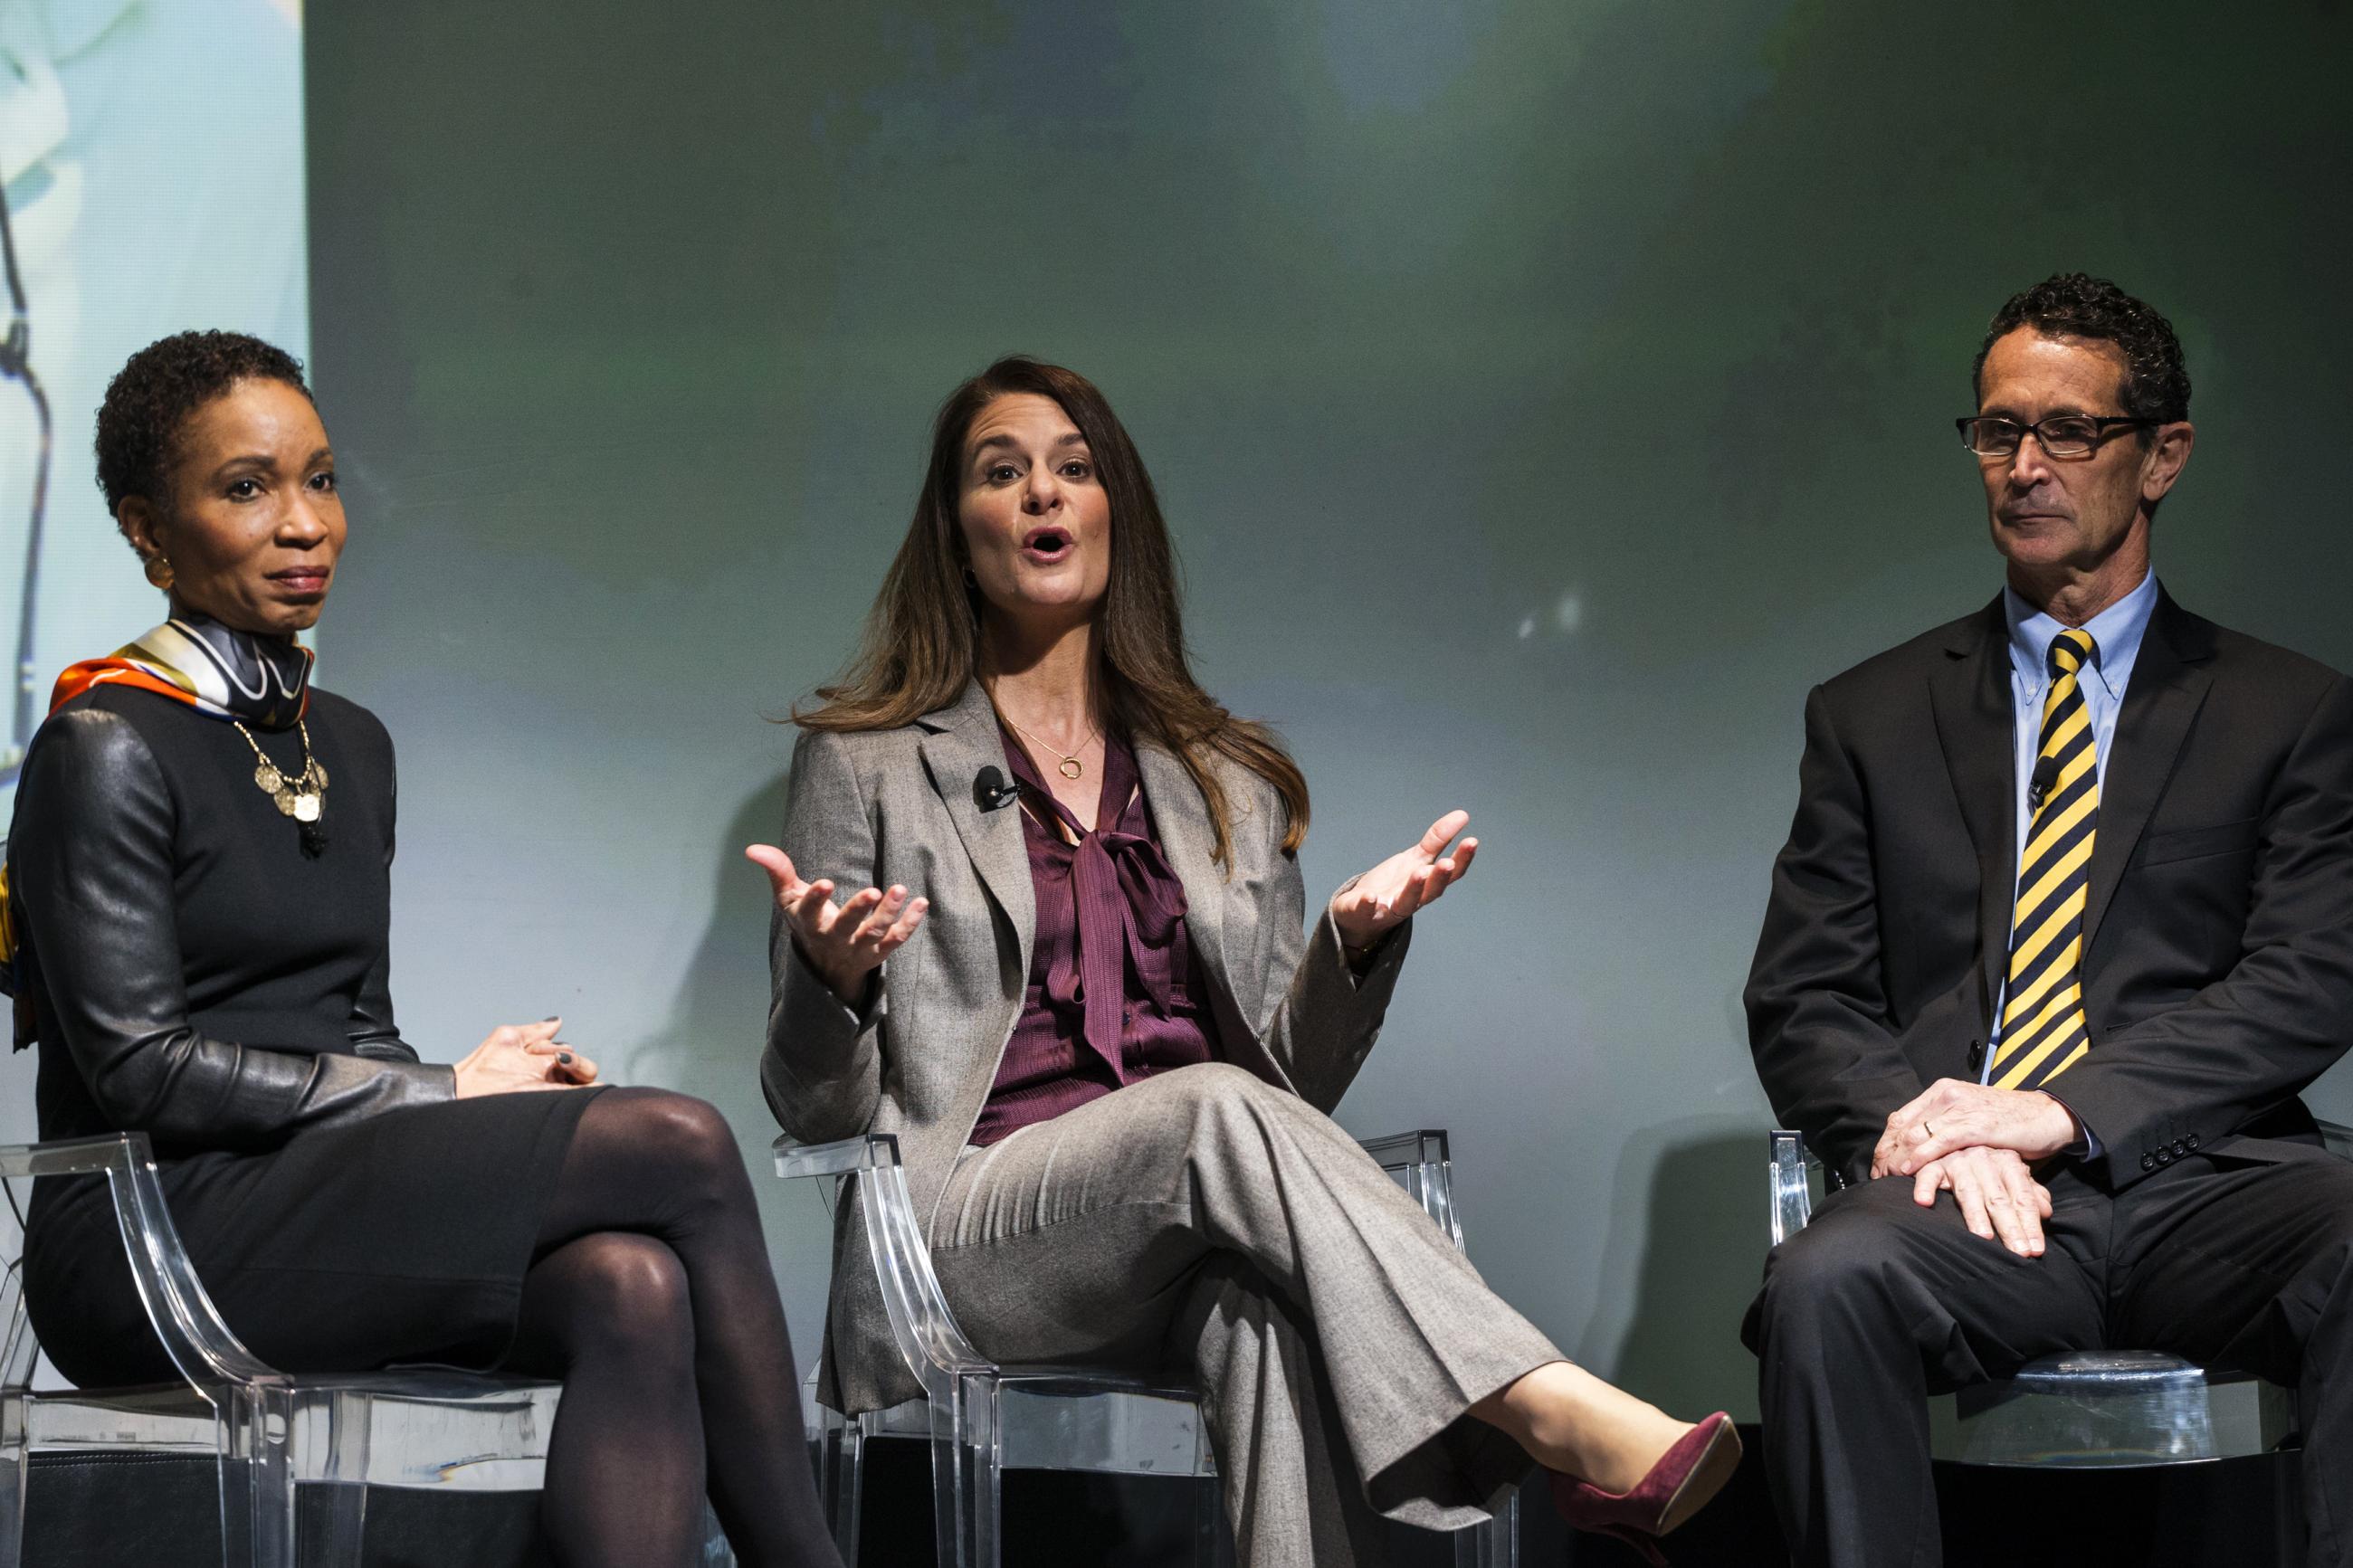 Melinda Gates speaks with Helene Gayle, president of CARE, and Bruce Wilkinson, CEO of the Catholic Medical Mission Board during the unveiling of the "No Ceilings" study in New York, on March 9, 2015.